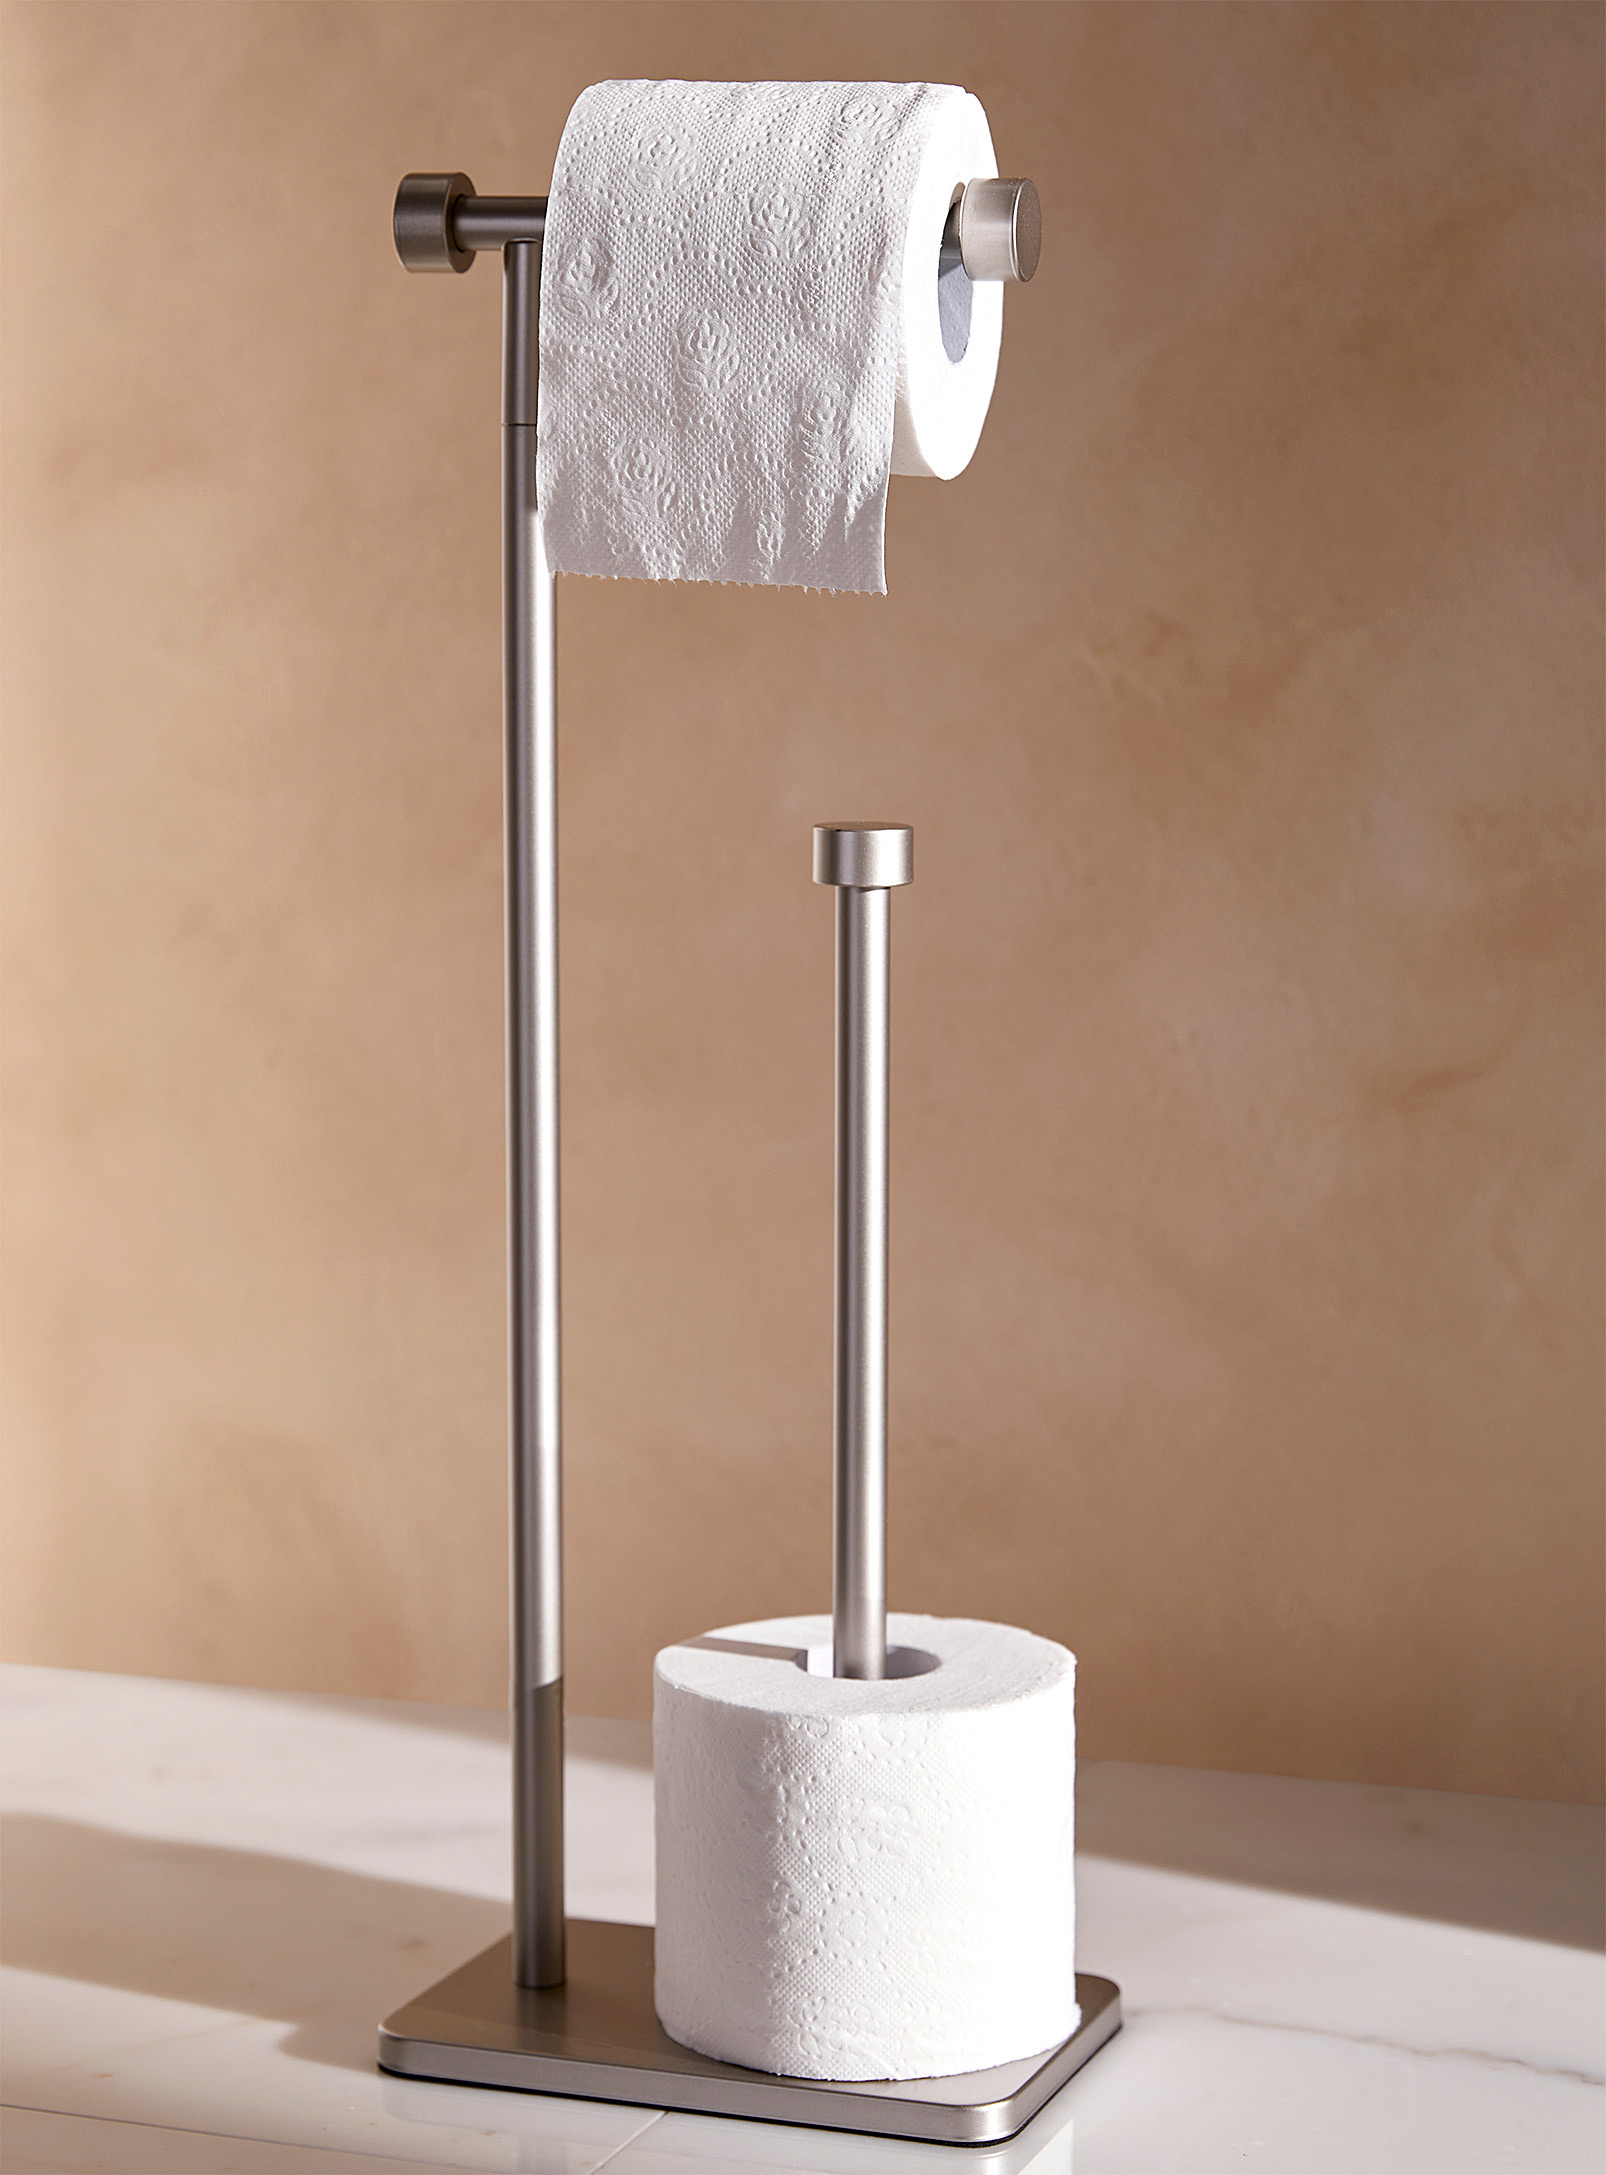 Umbra - Silver toilet paper holder with reserve